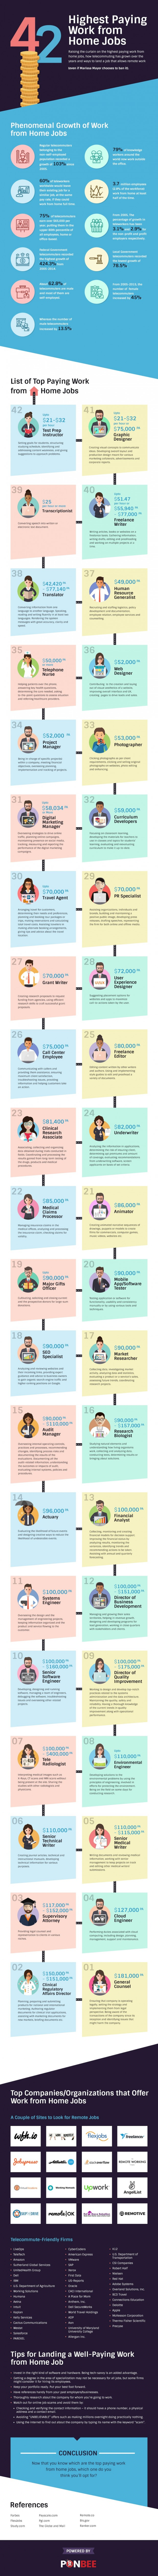 work-from-home-jobs-infographic